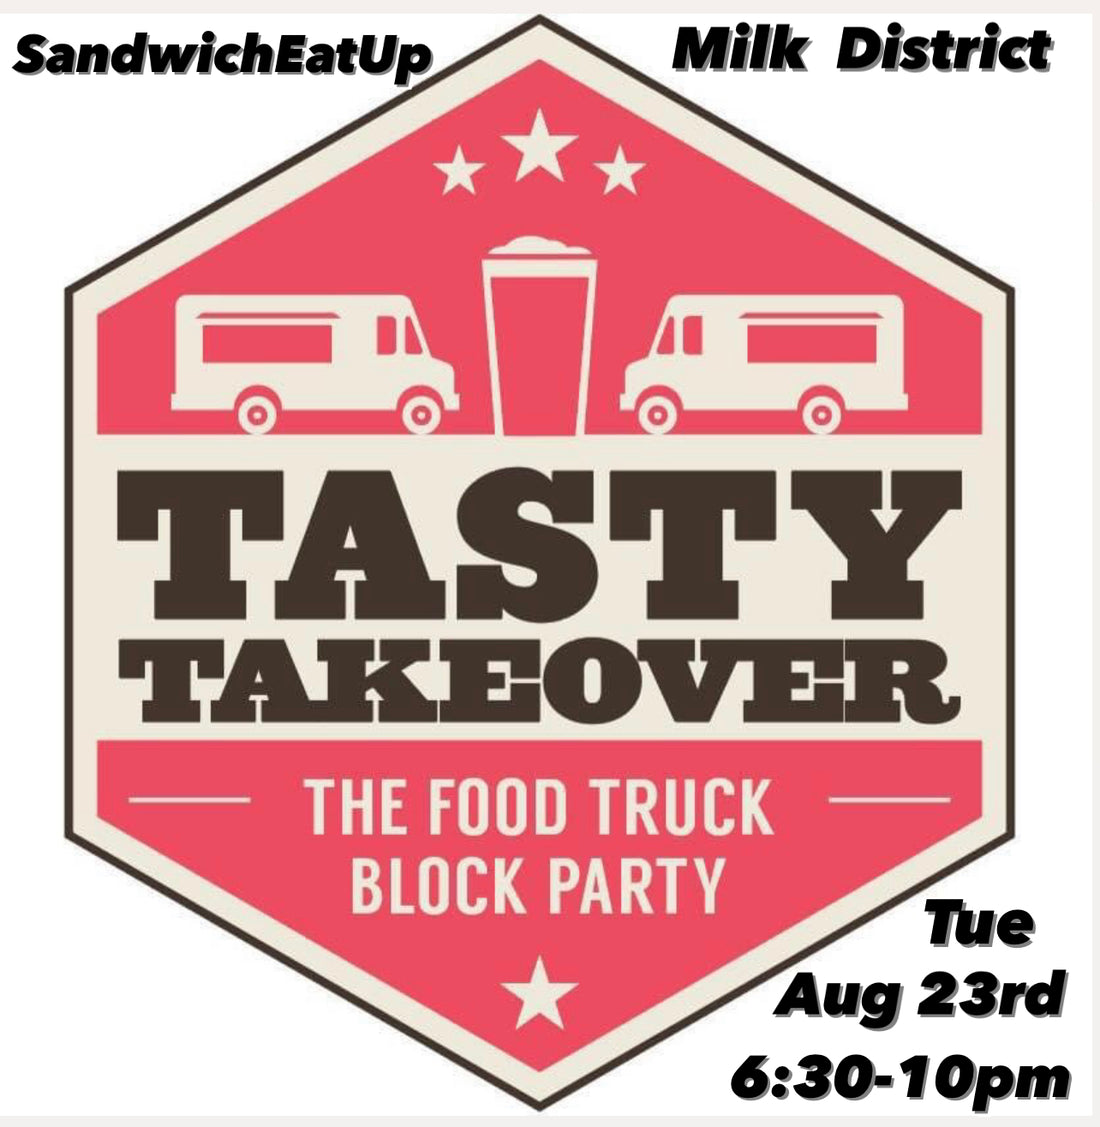 SandwichEatUp at Tasty Takeover in the Milk District